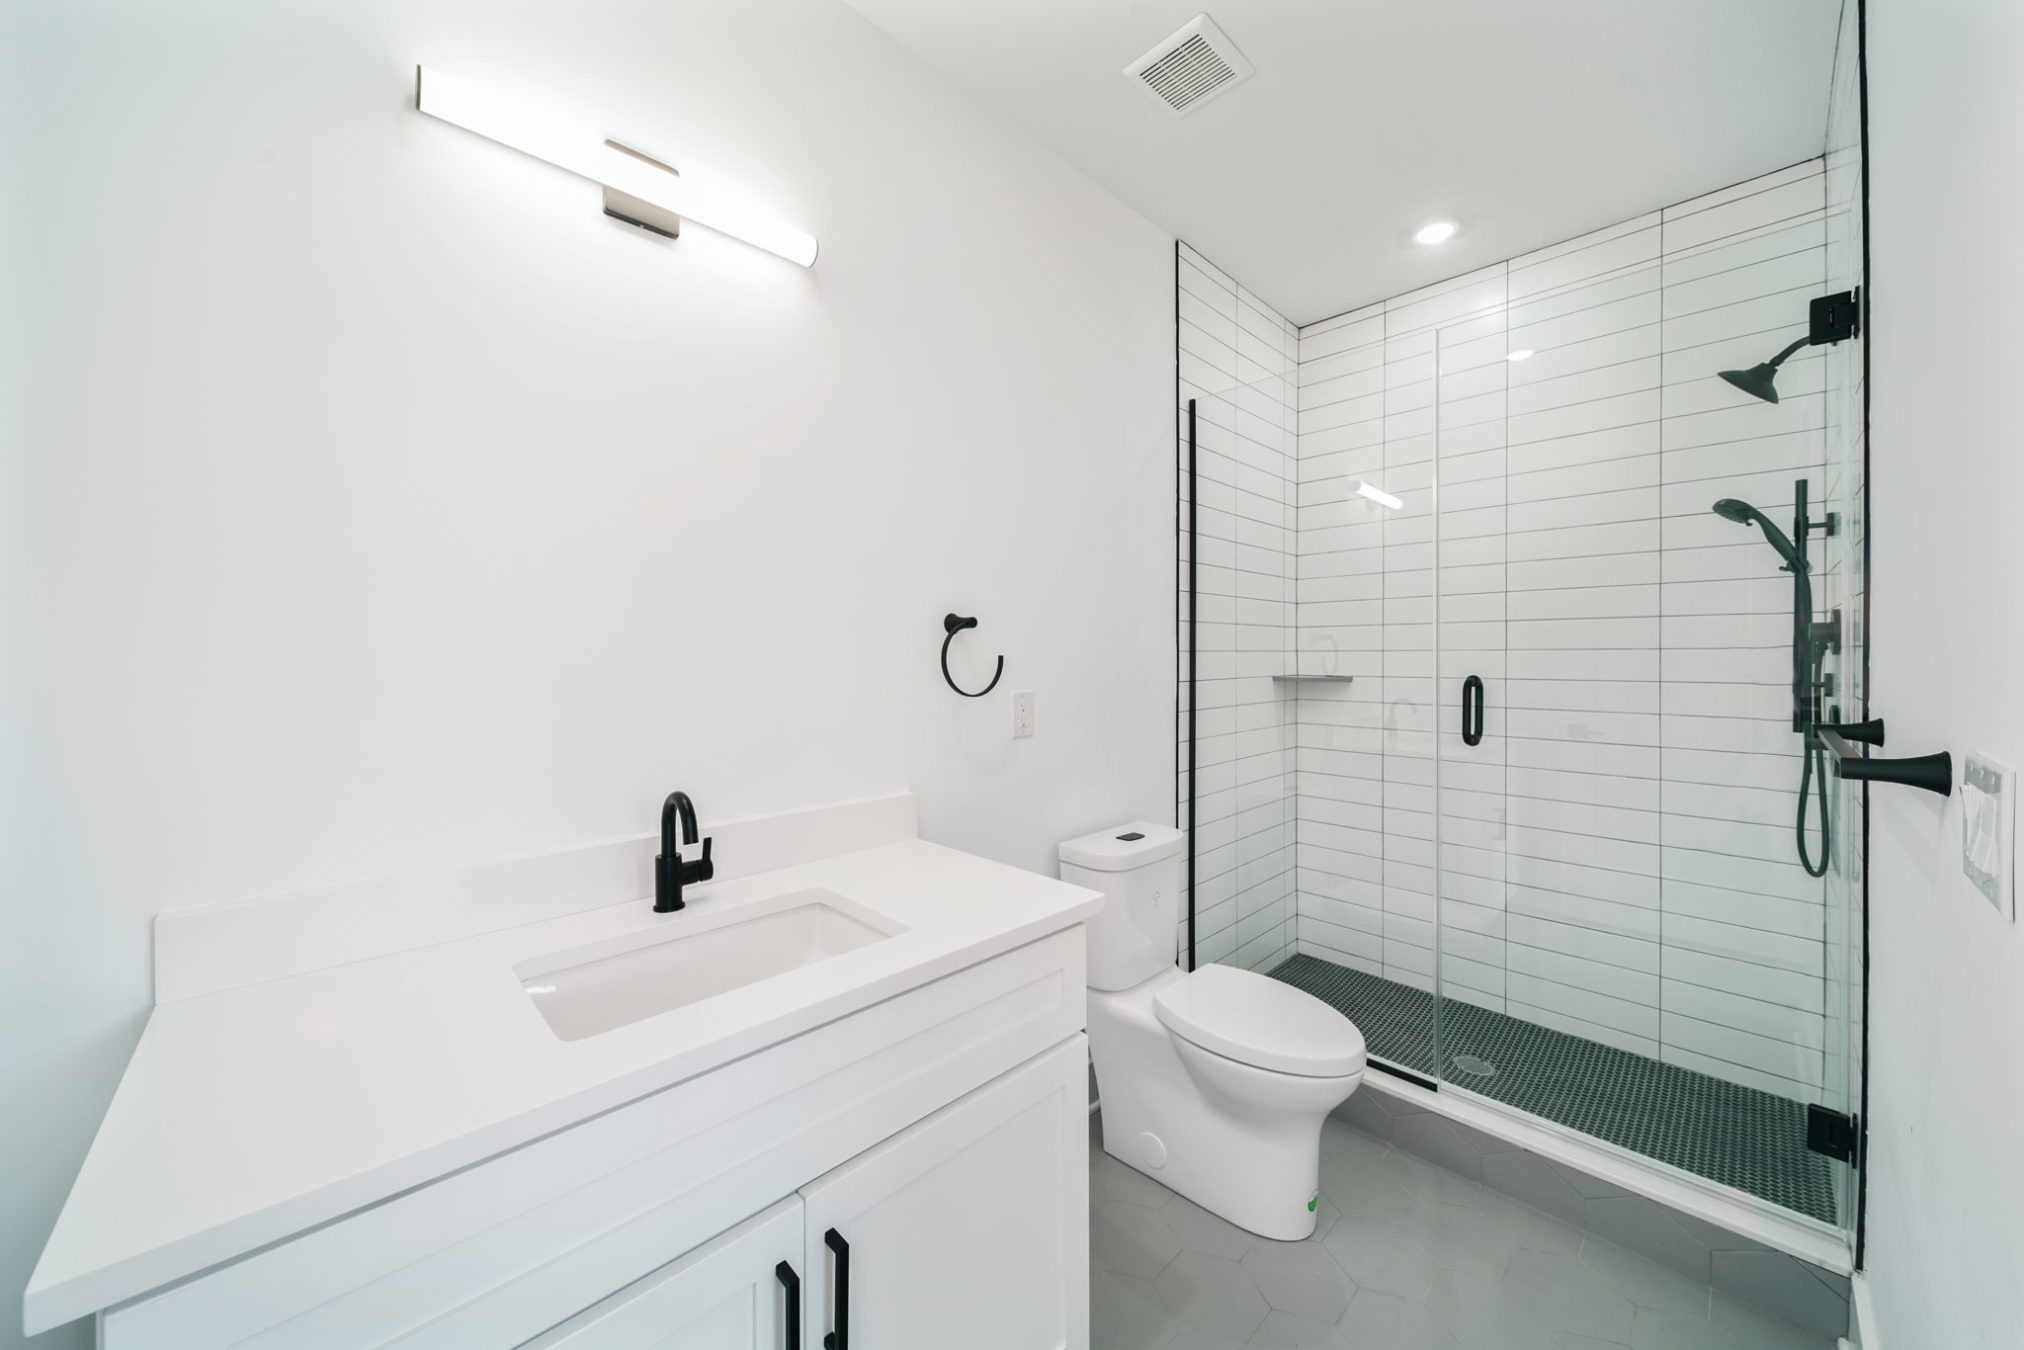 Property Photo For 25 W Hortter St - Unit 217